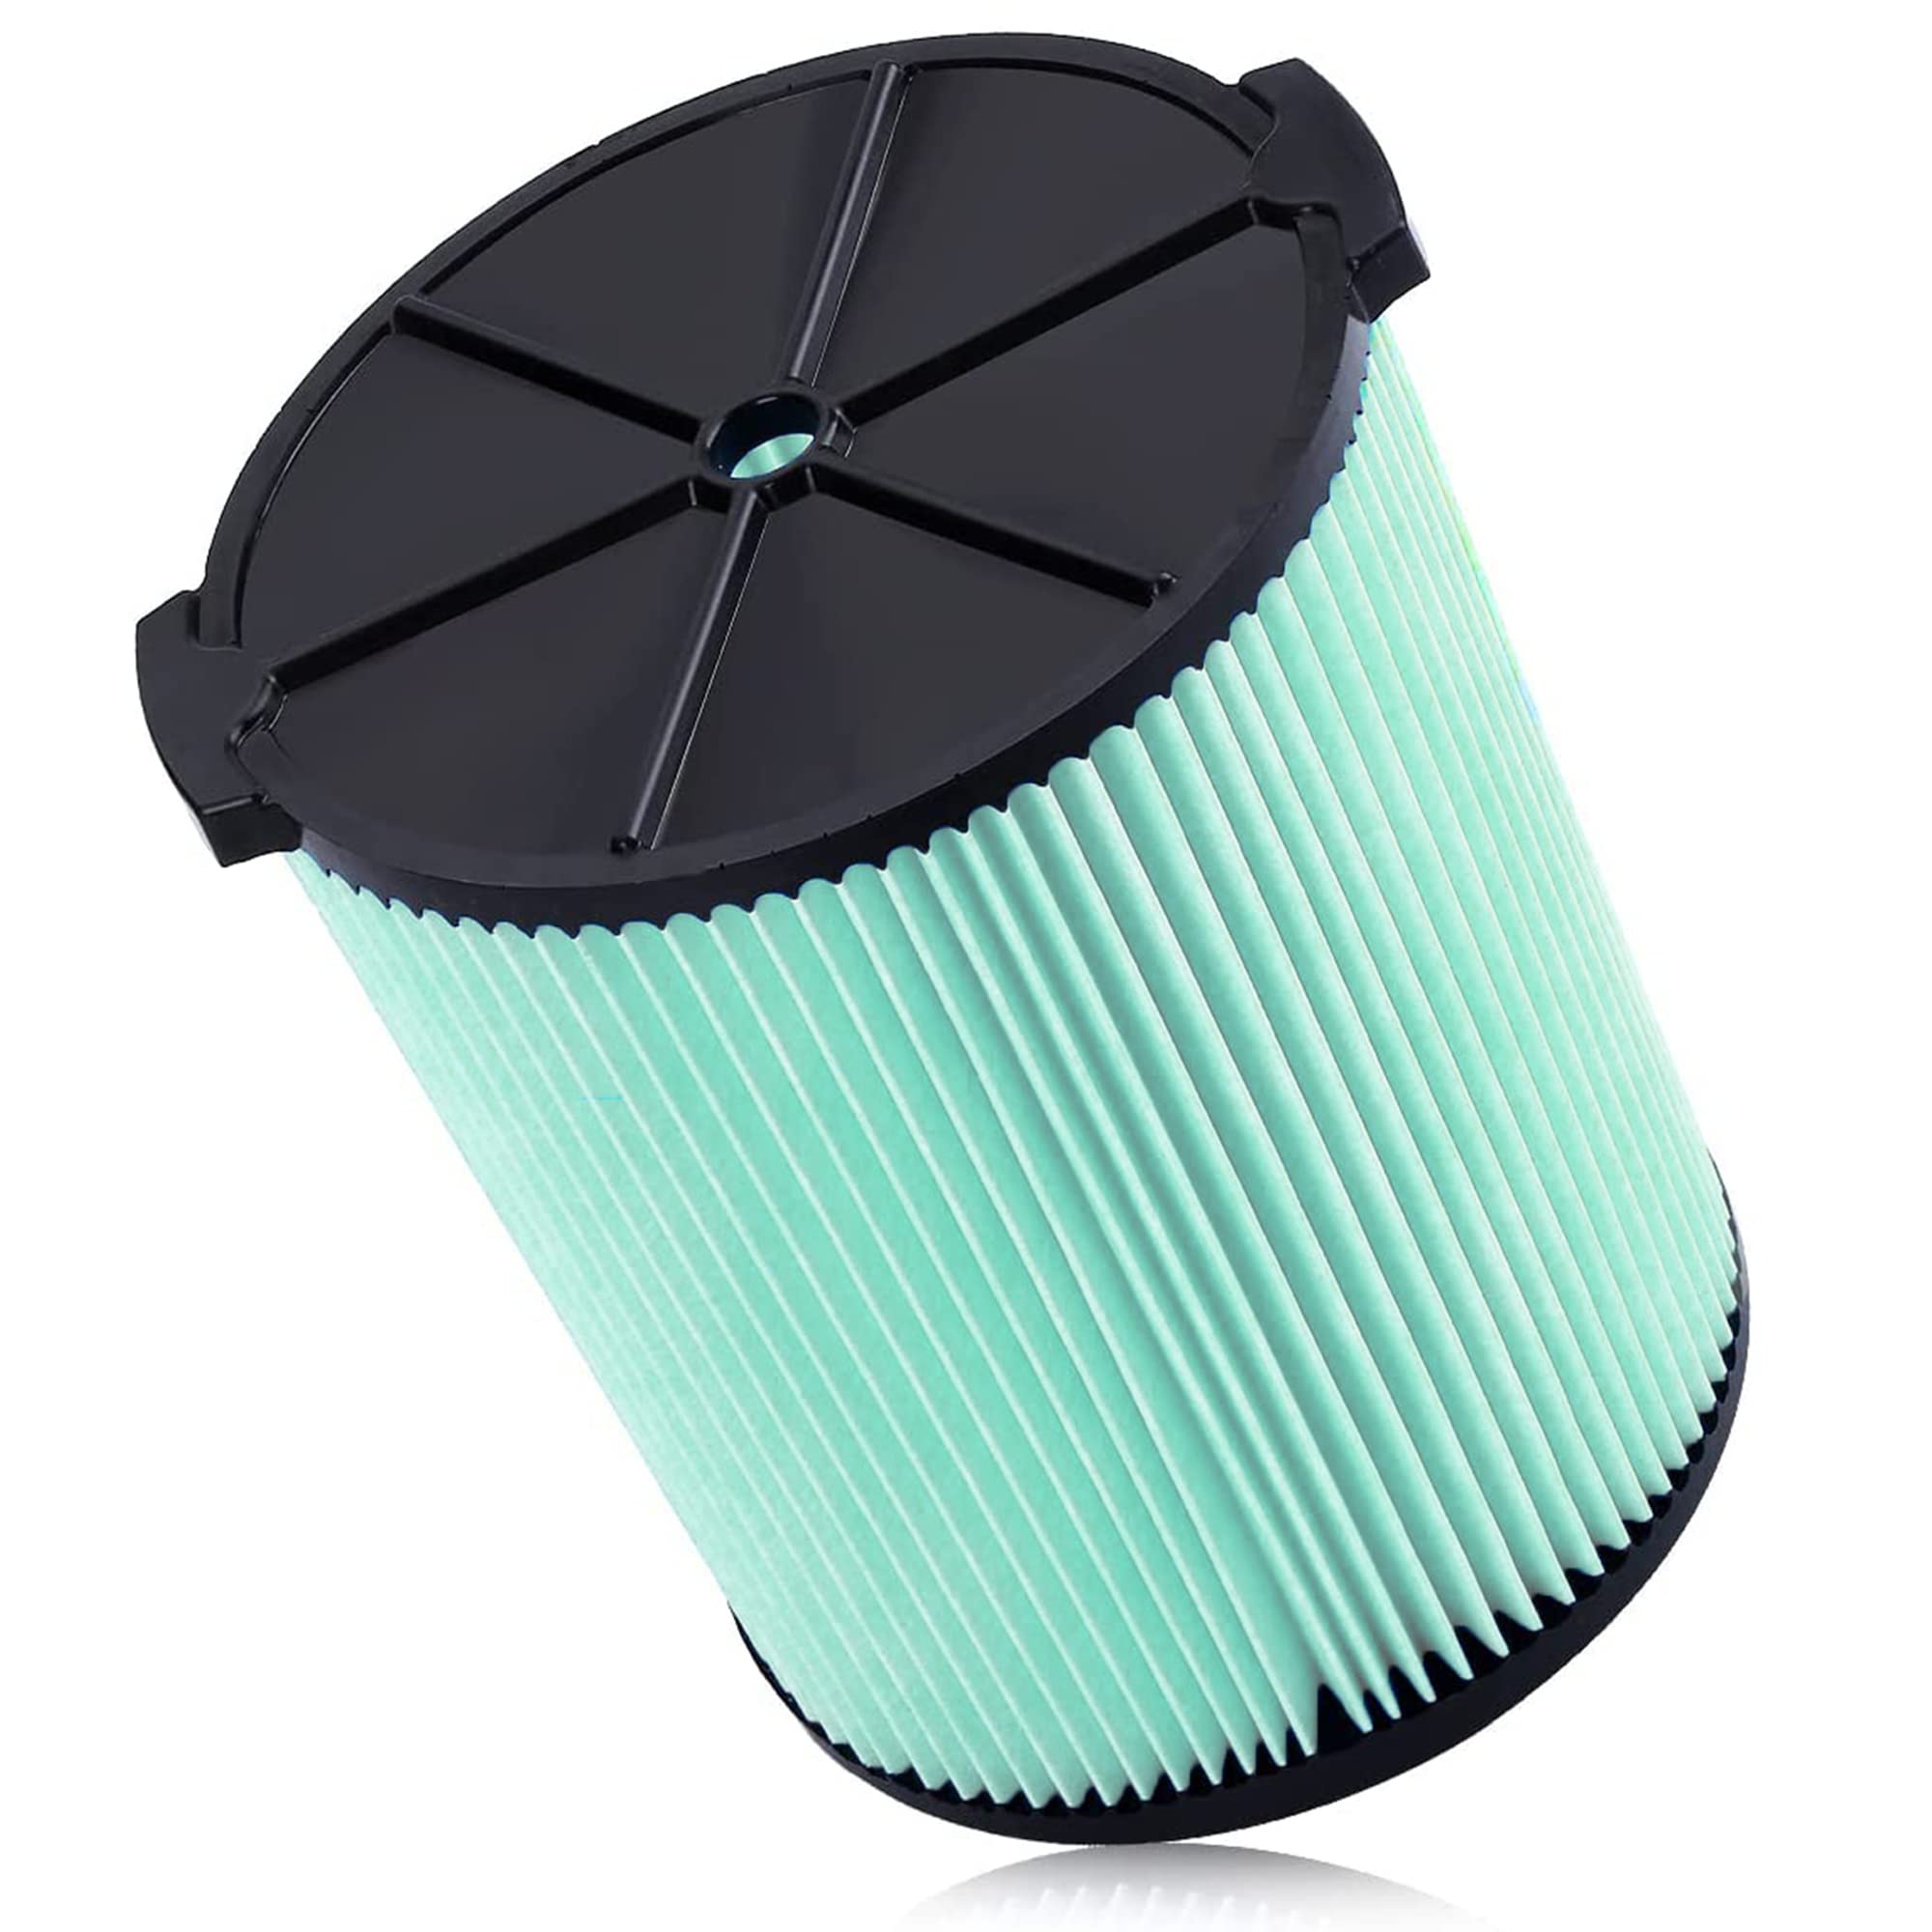 5-Layer Replacement Vacuum Filter VF6000 Compatible with Ridgid Wet/Dry Shop Vac 5-20 Gallon Vacuums WD5500 WD0671 WD6425 WD7000 WD1280 WD1851 WD1680 WD1956 RV2400A 1400RV RV2600B